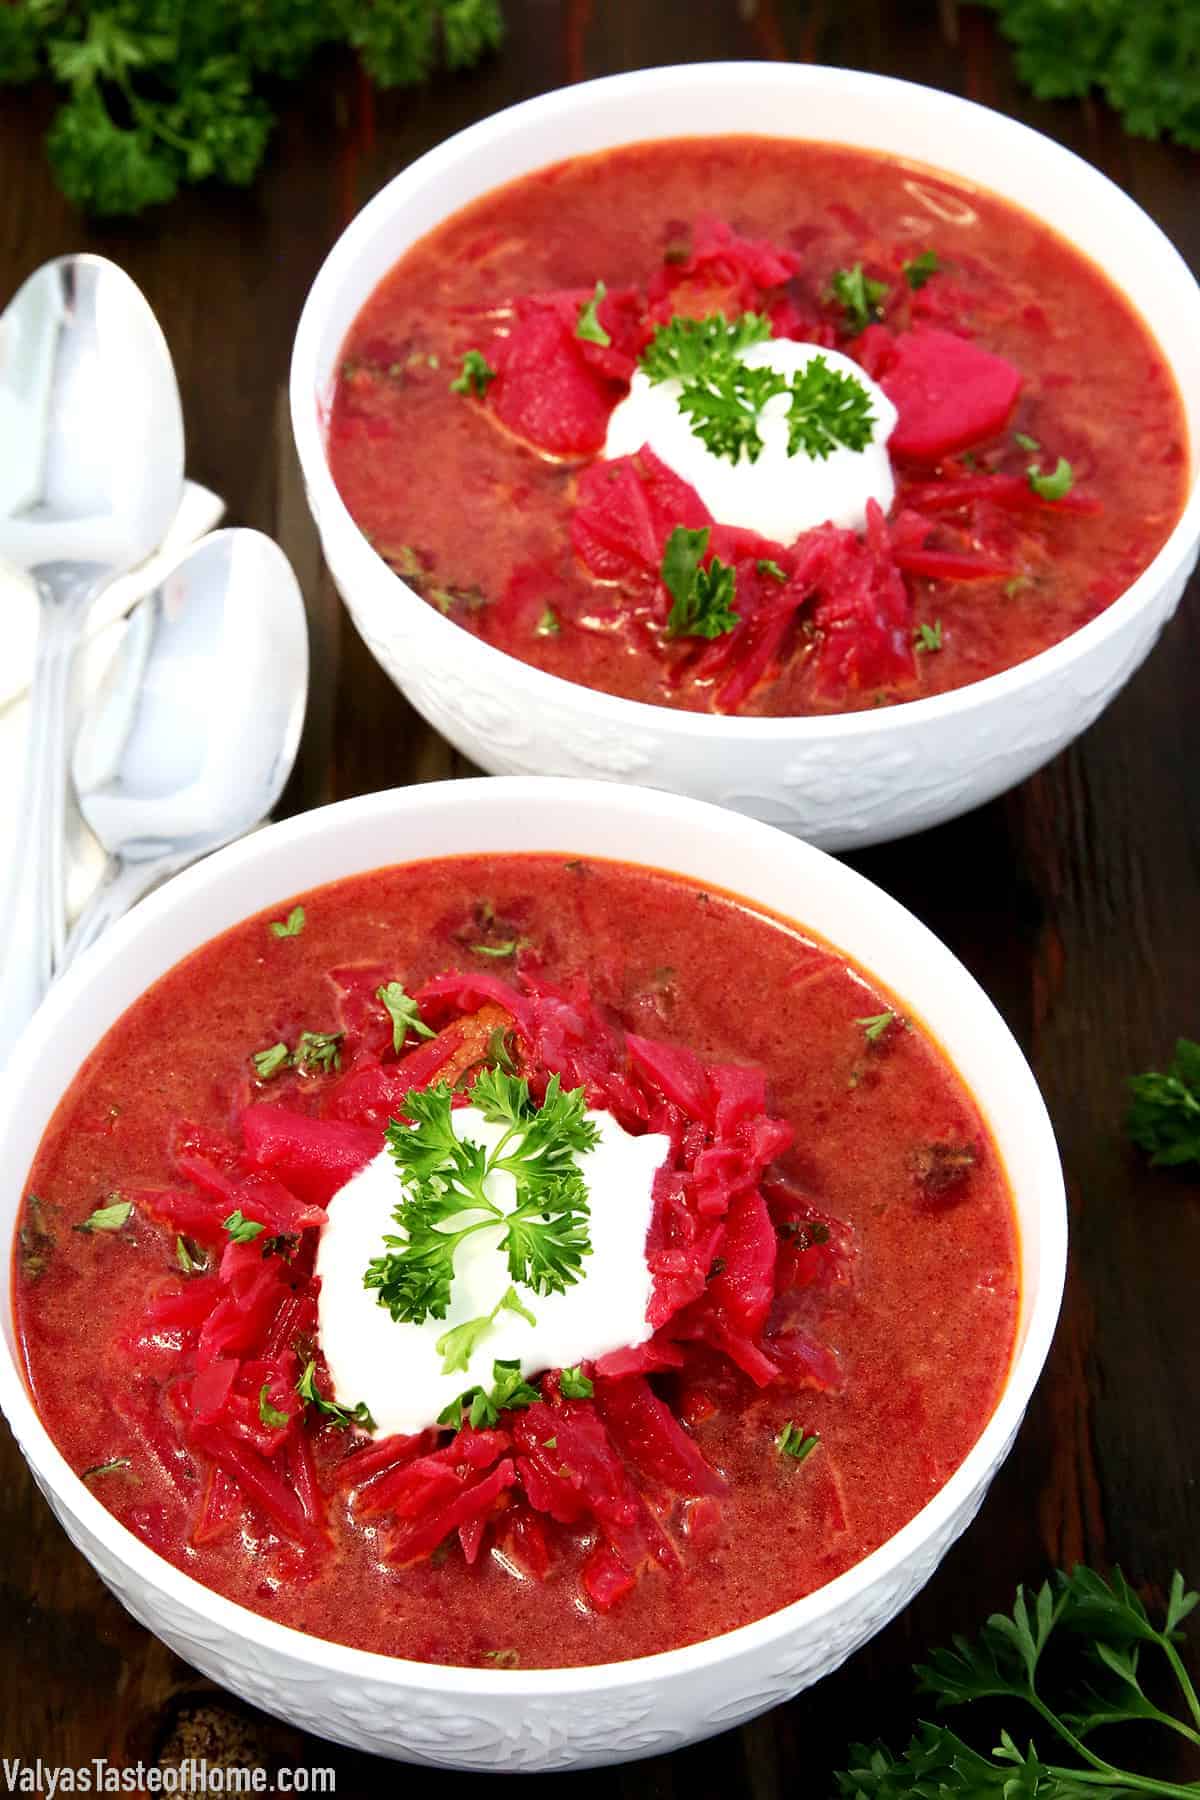 The well-know national Ukrainian cuisine recipe is borscht – a soup made of red beets and vegetables. 